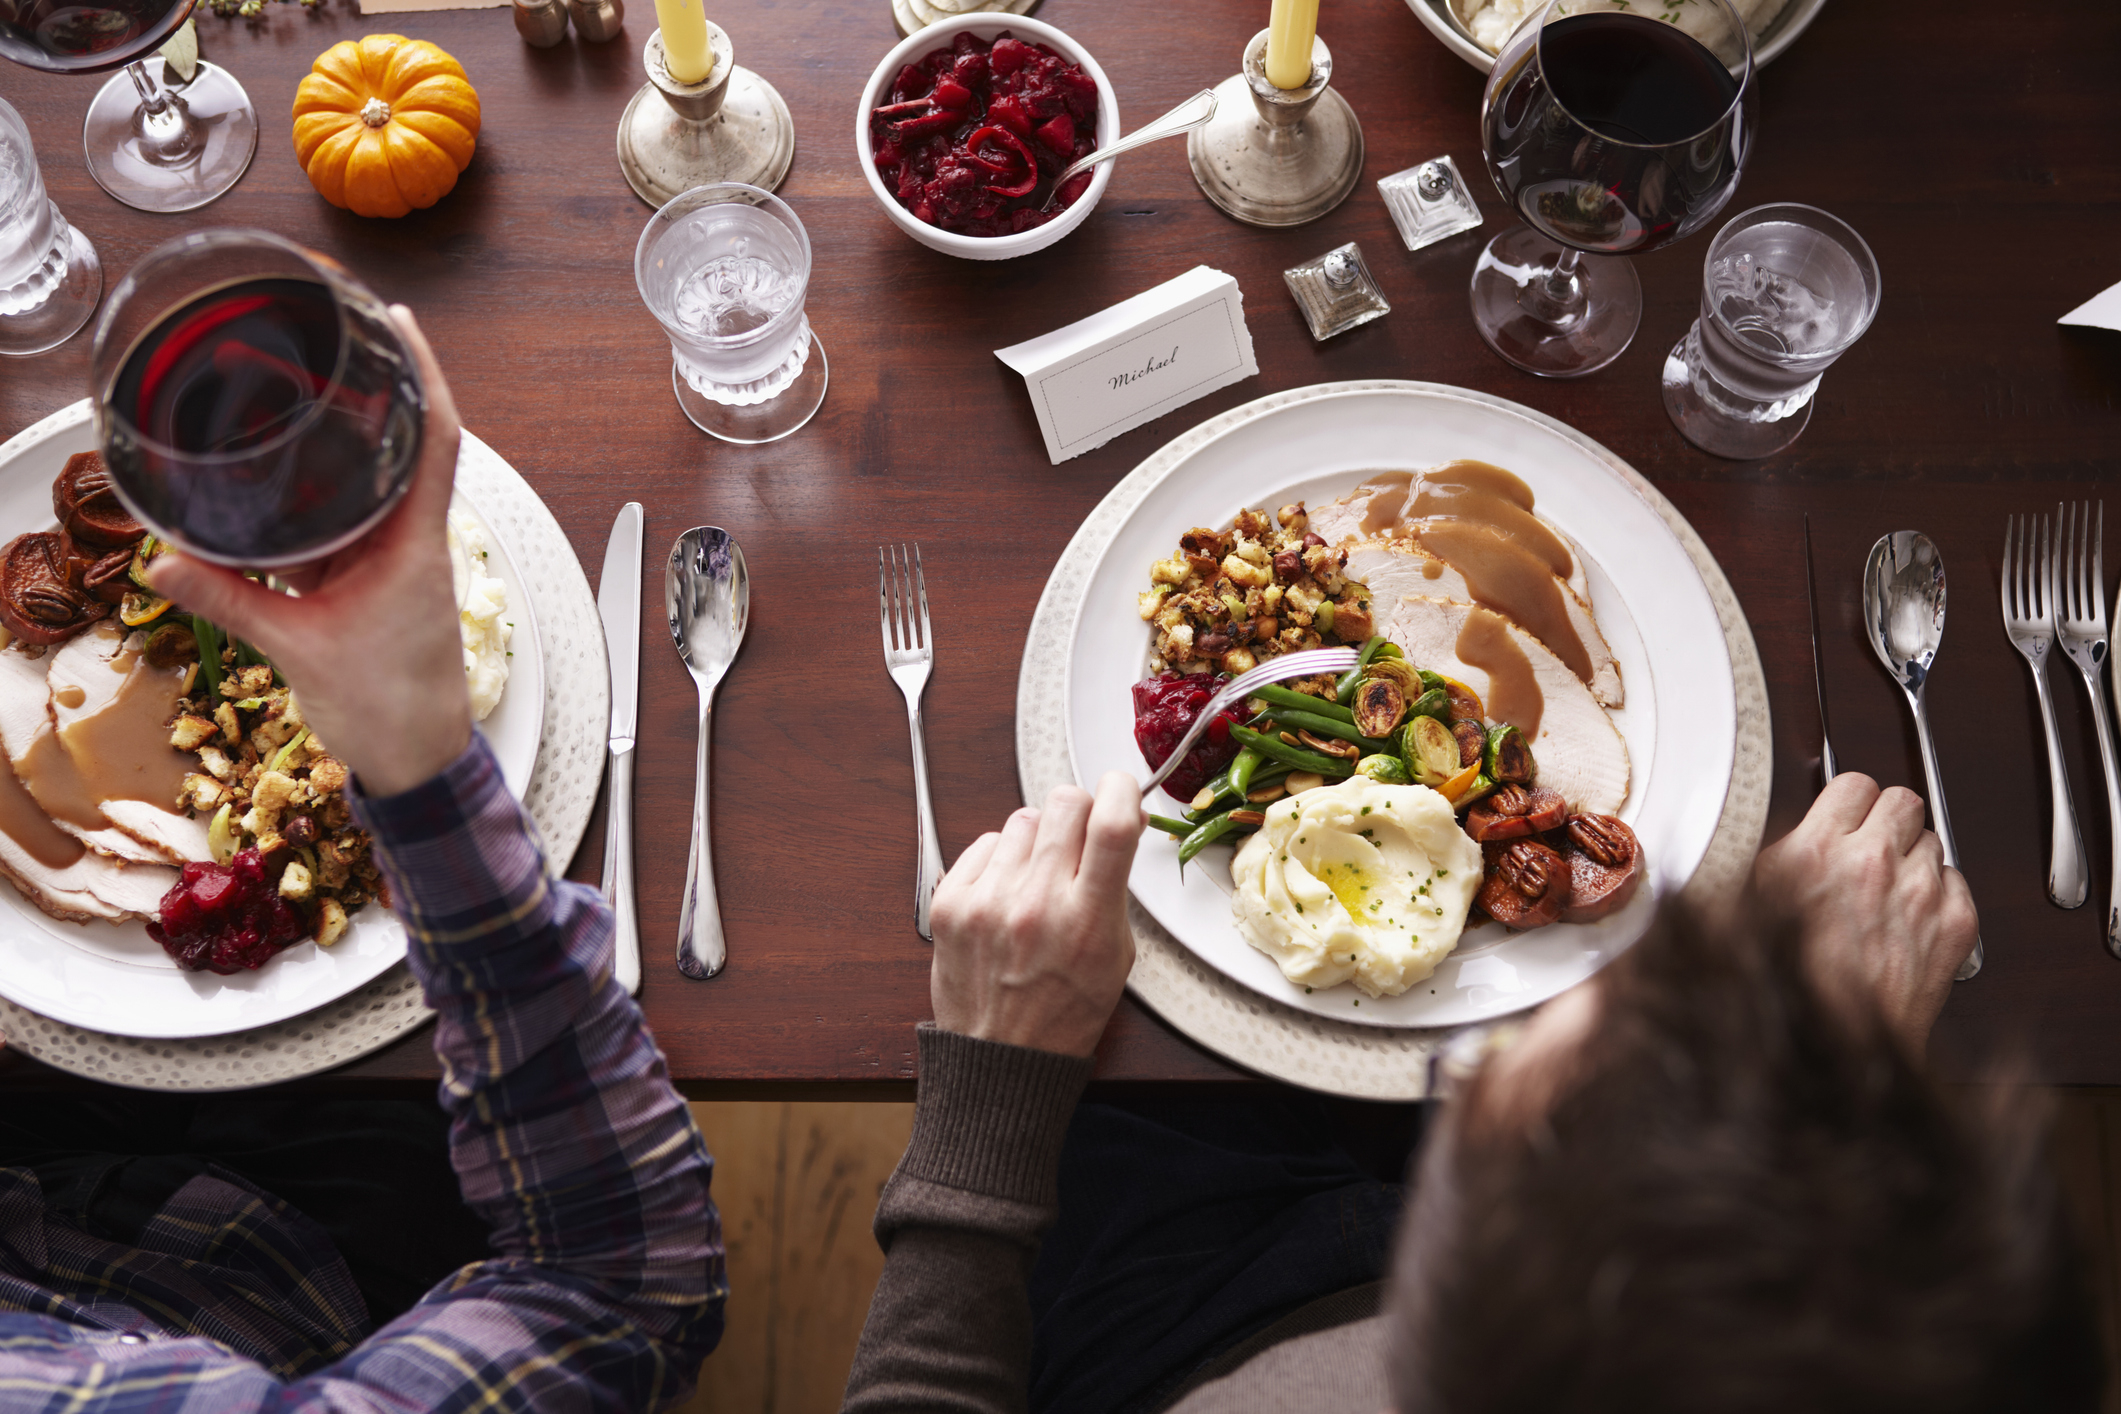 Top-down view of a person at a dining table holding a wine glass over a plate with a variety of Thanksgiving foods